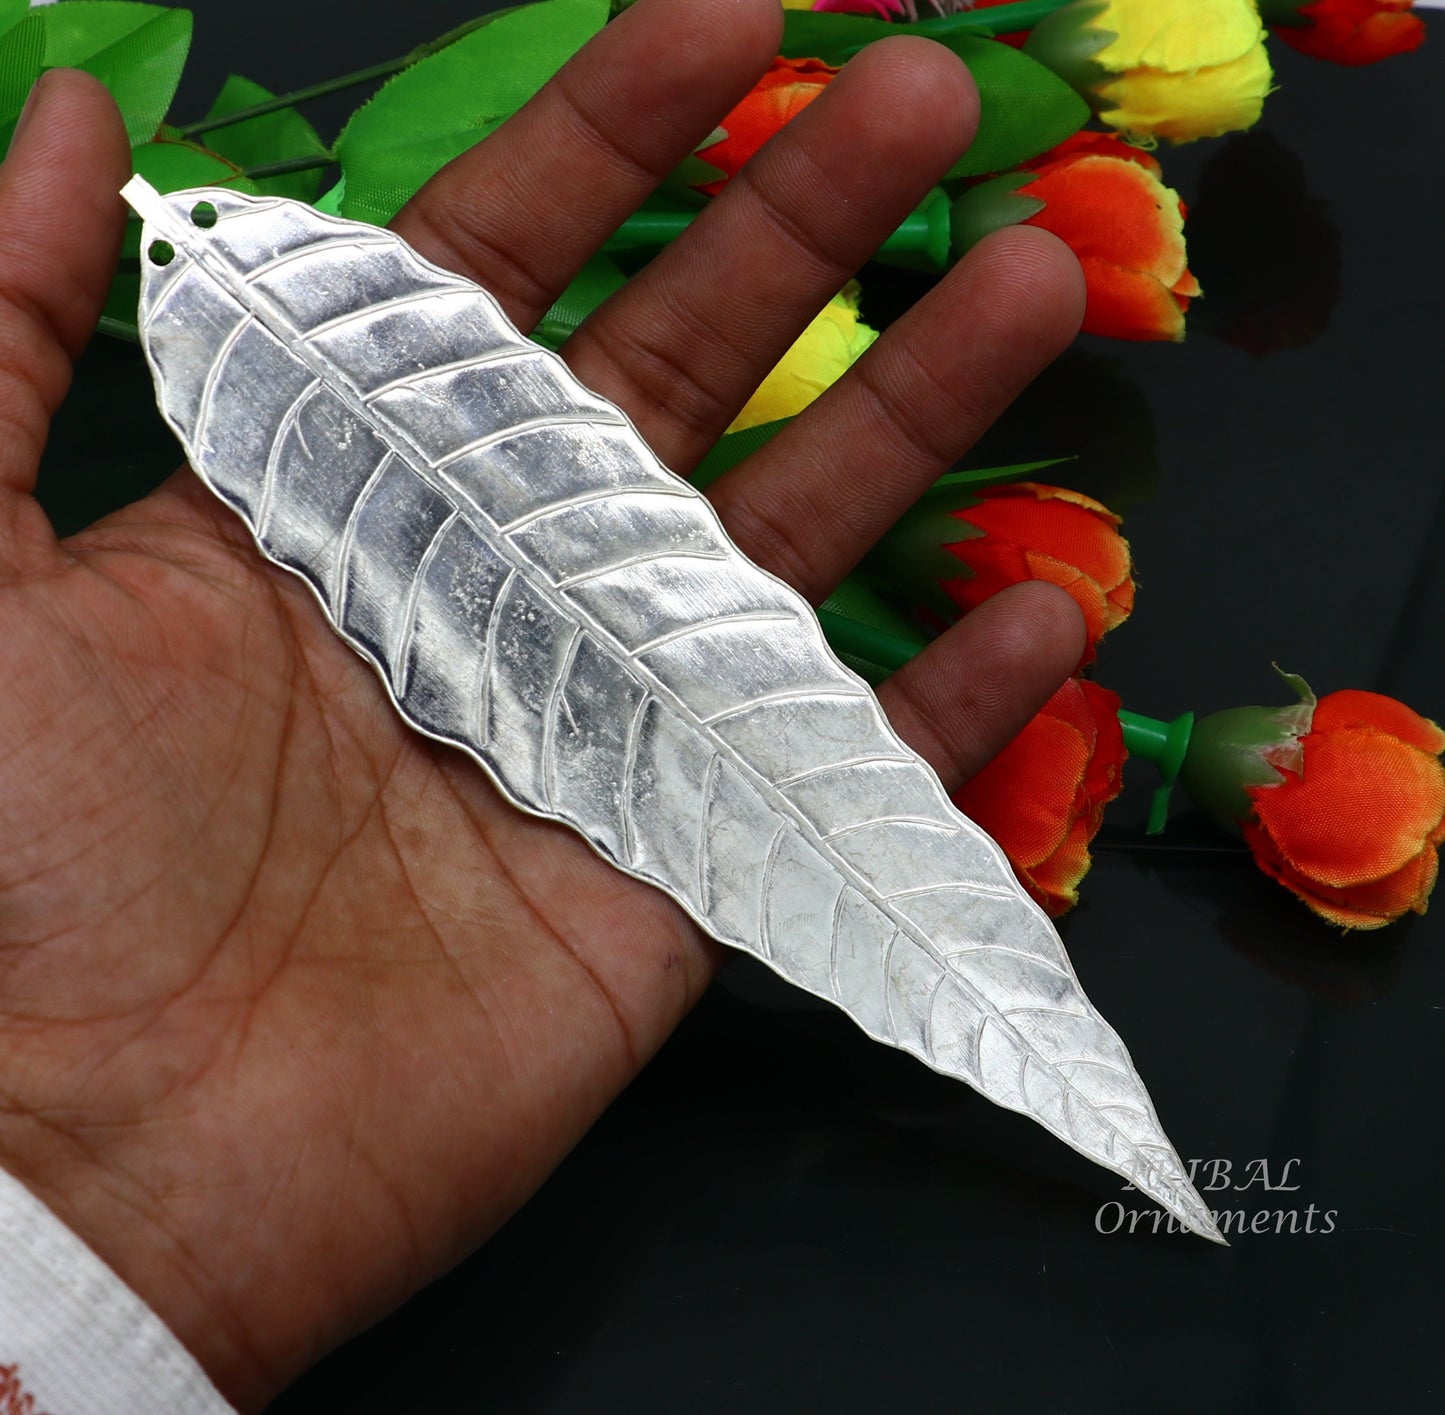 7" Silver mango tree leaf Amazing puja worshipping article solid sterling silver diwali puja articles, silver utensils from india su837 - TRIBAL ORNAMENTS